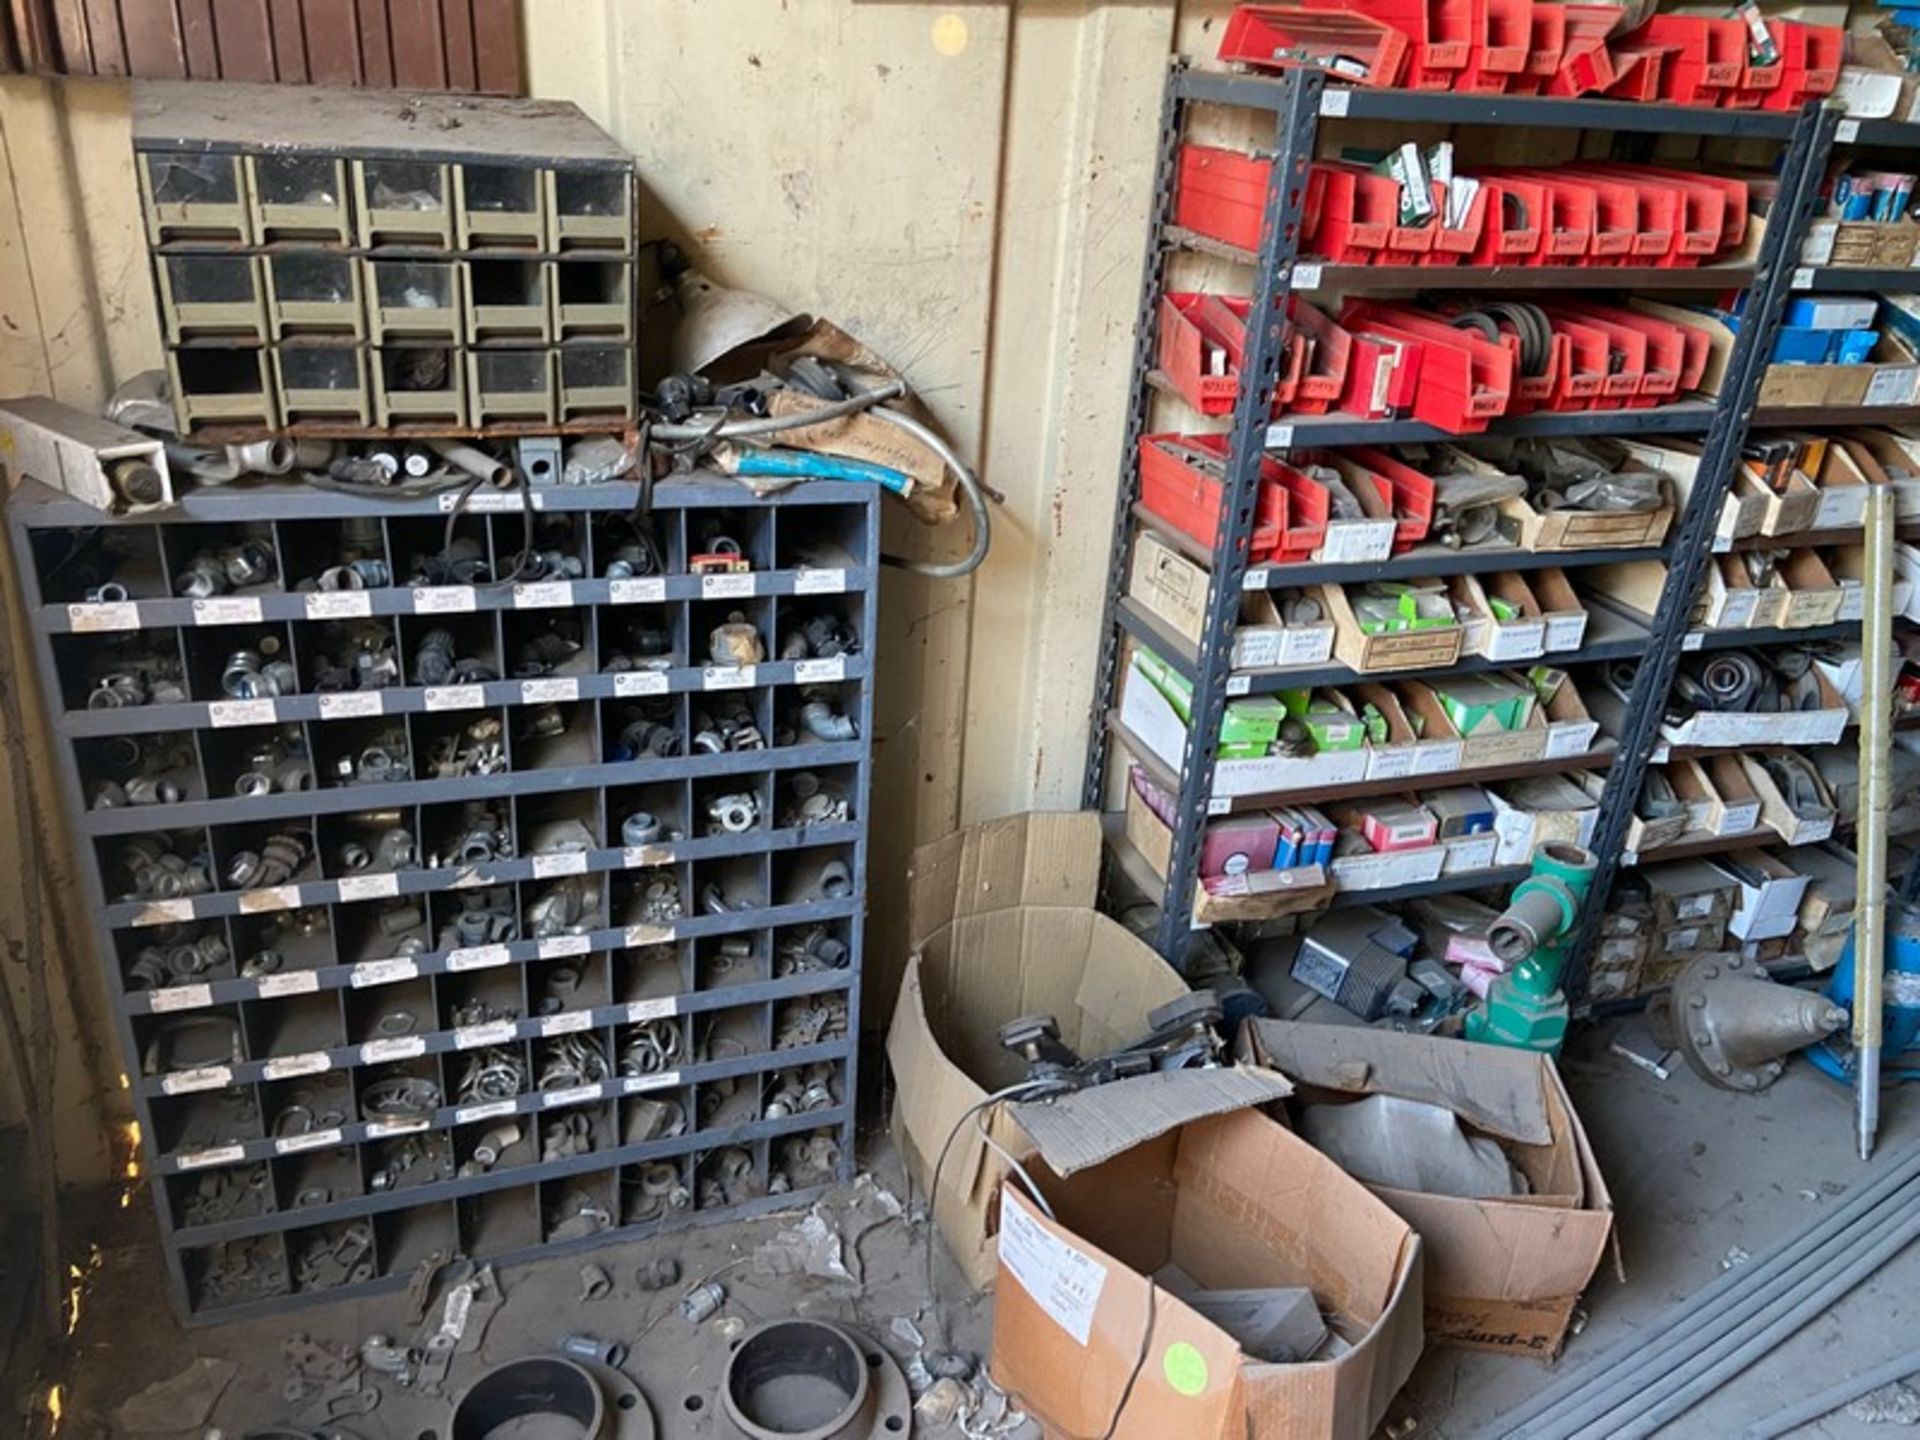 Contents of (2) Overseas Containers, Includes Plumbing, Bearings, Valving Parts Bins, Shelving, Ligh